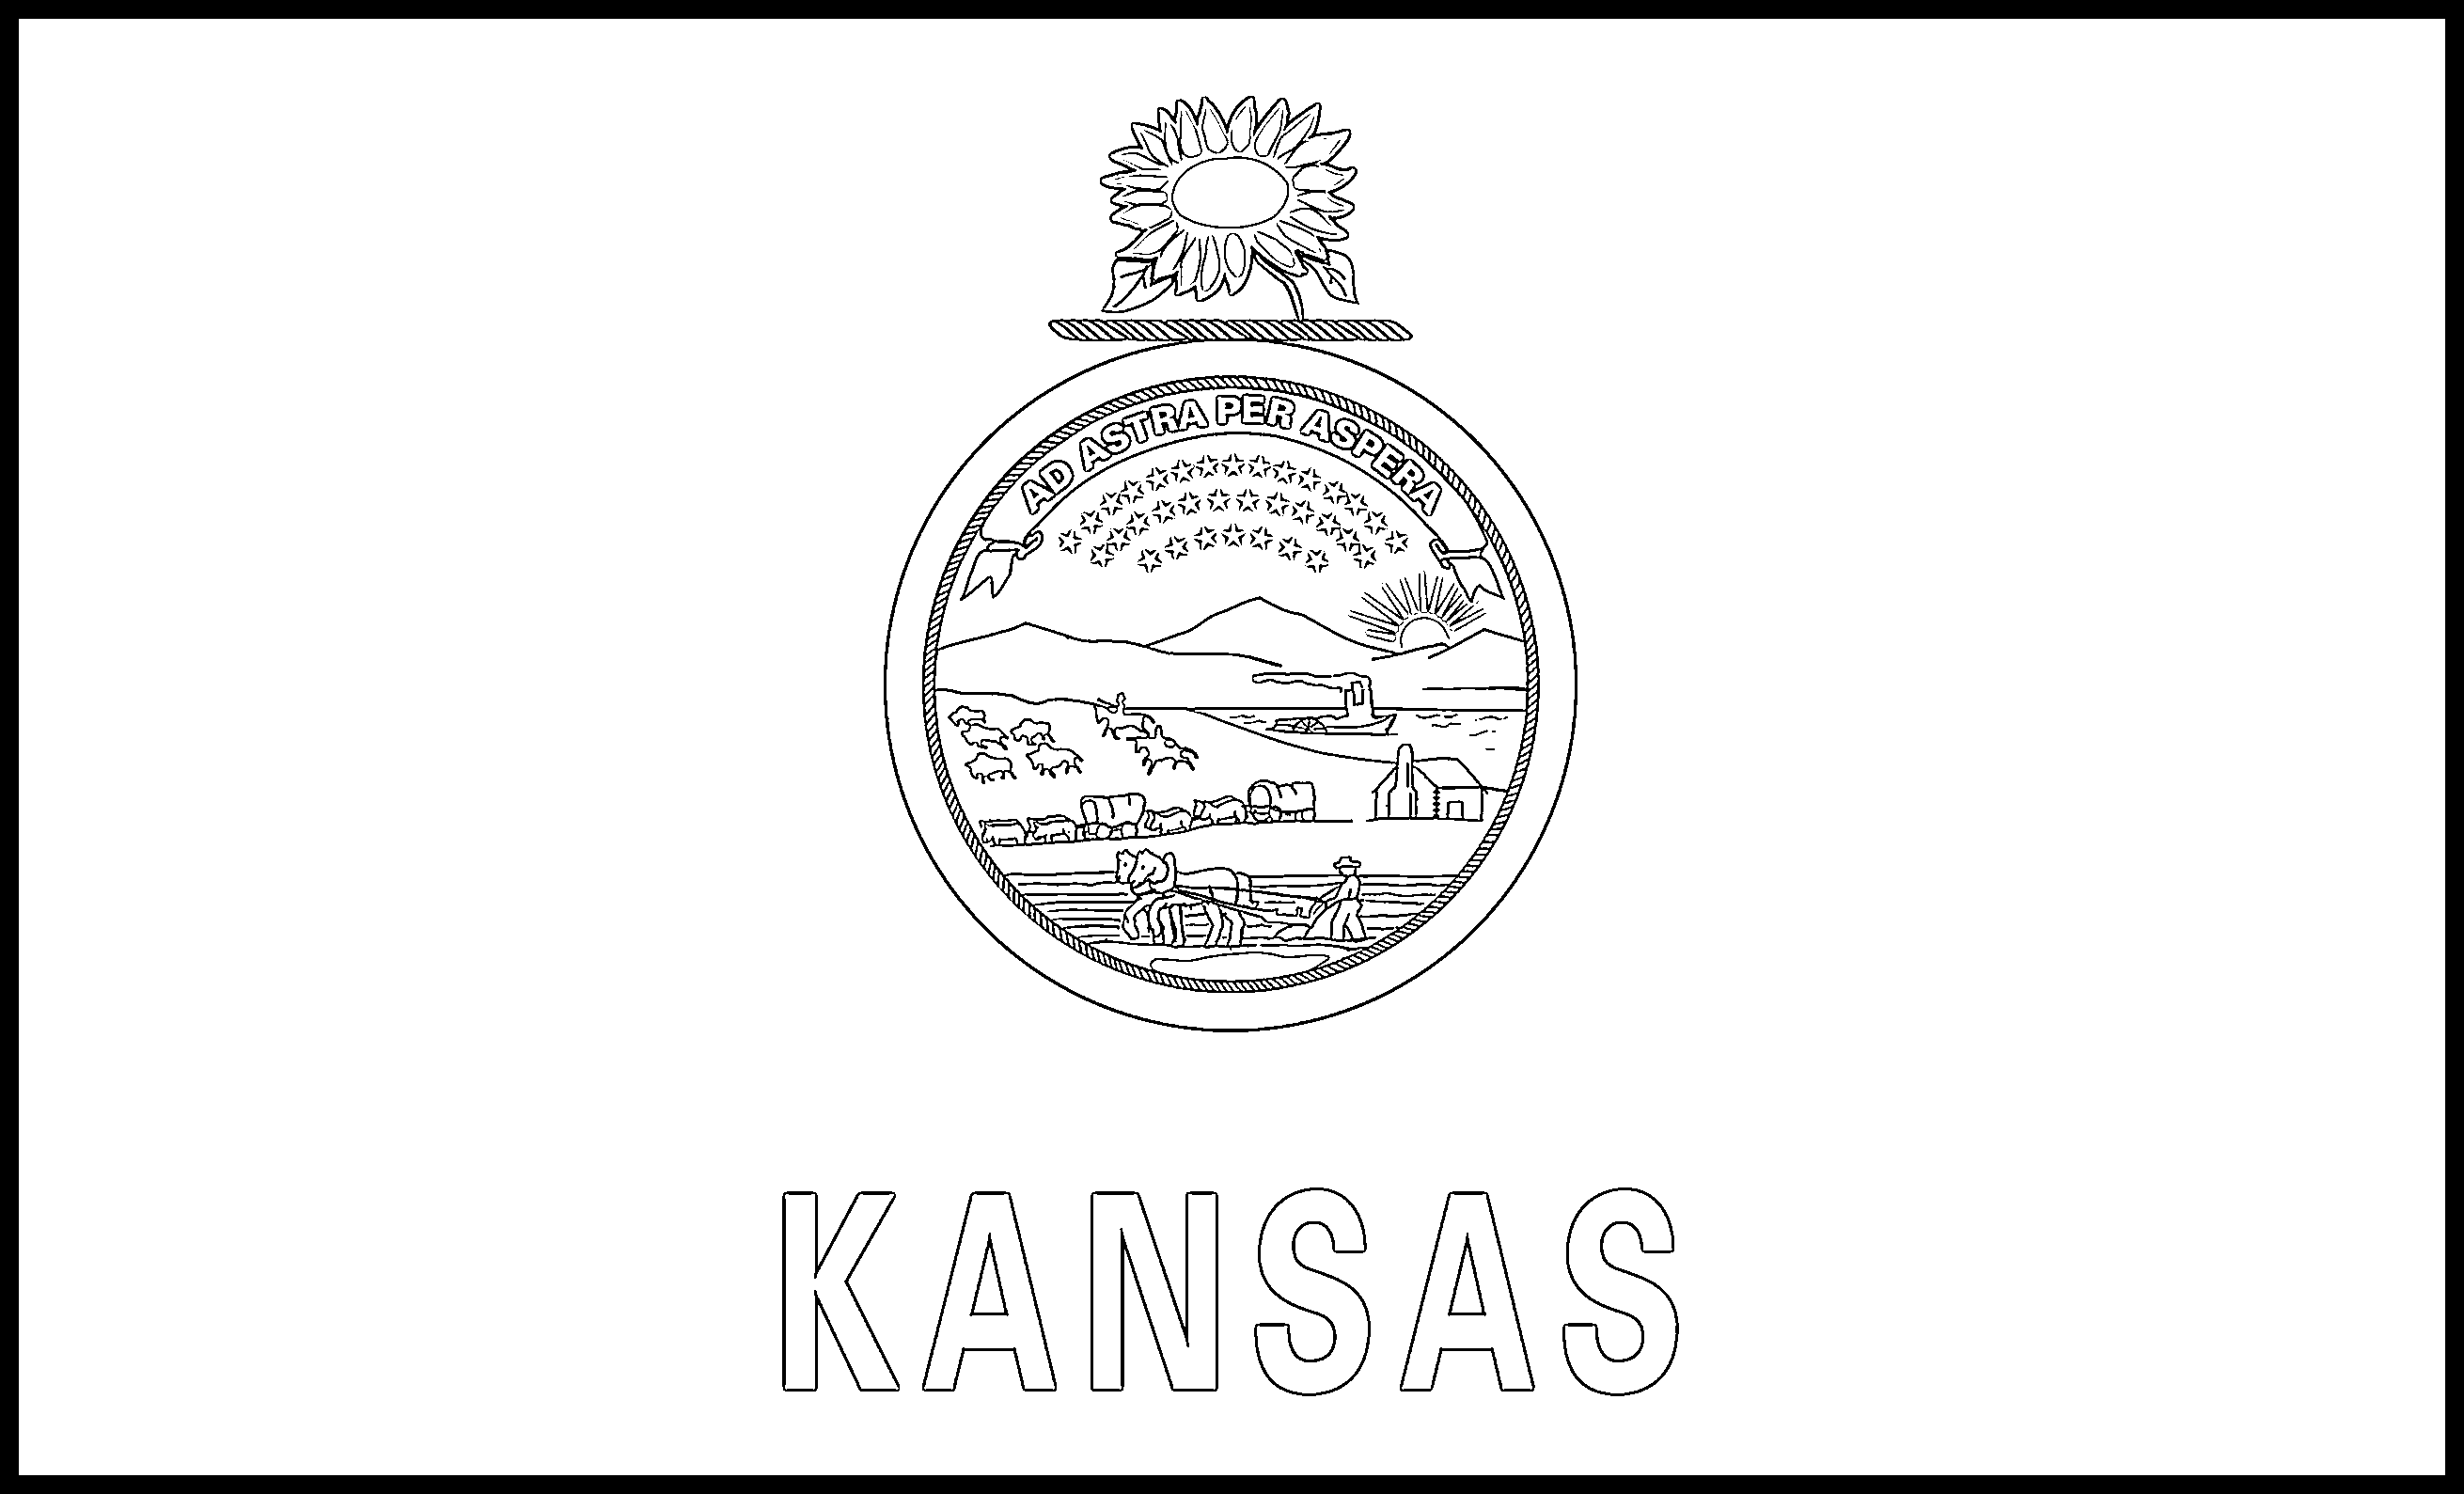 Kansas flag coloring page â state flag drawing â flags web